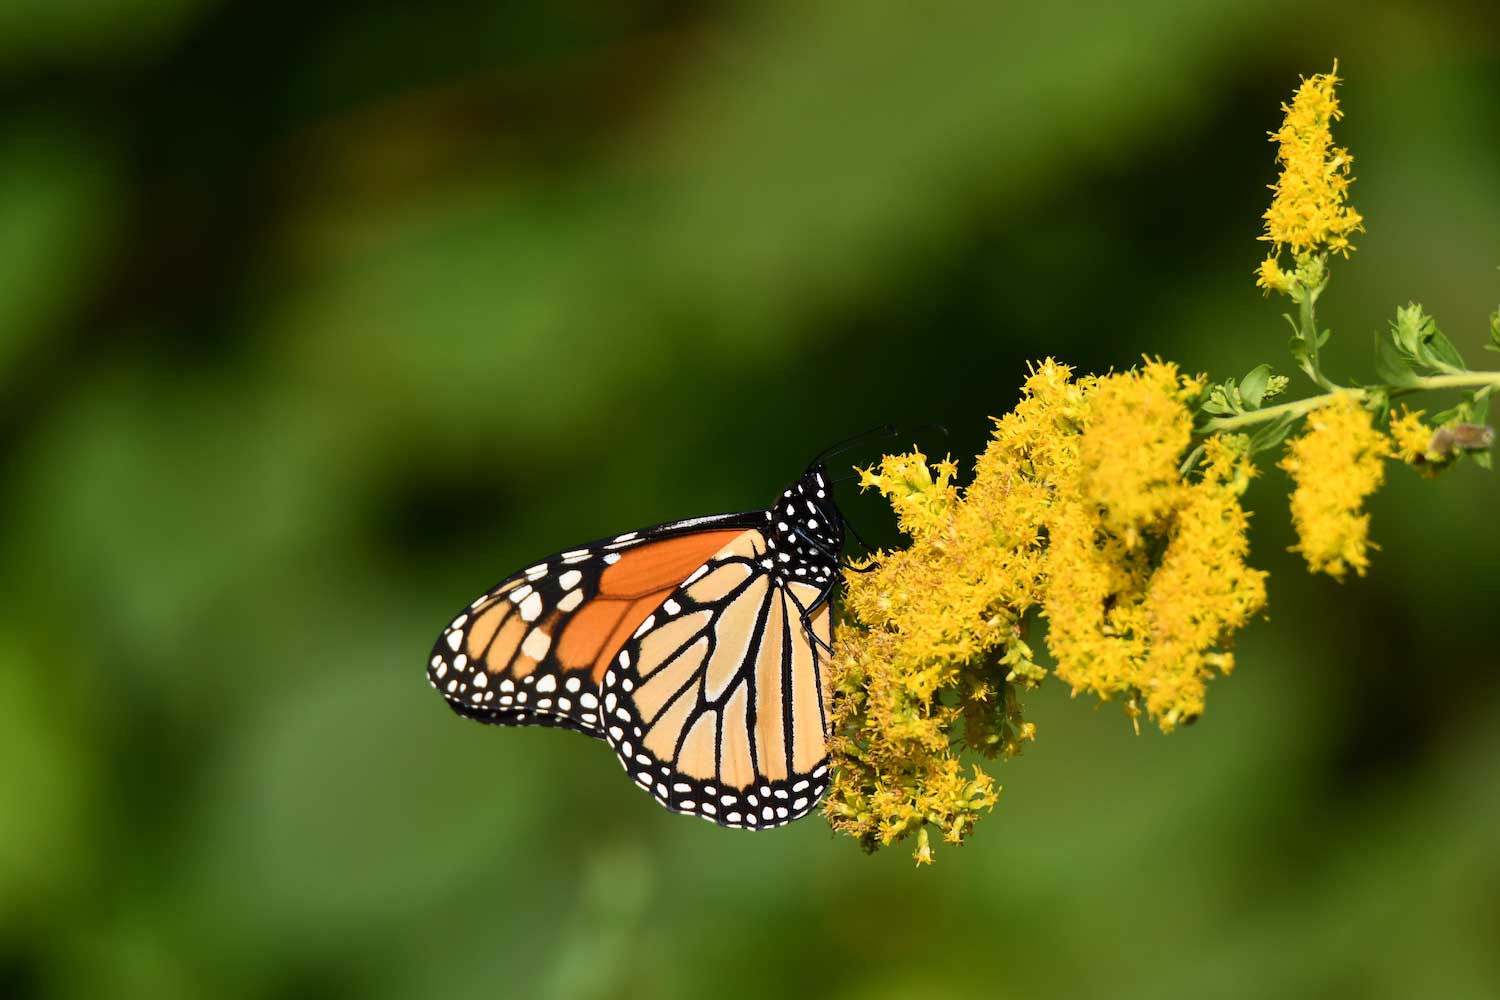 A monarch butterfly at rest on a goldenrod bloom.